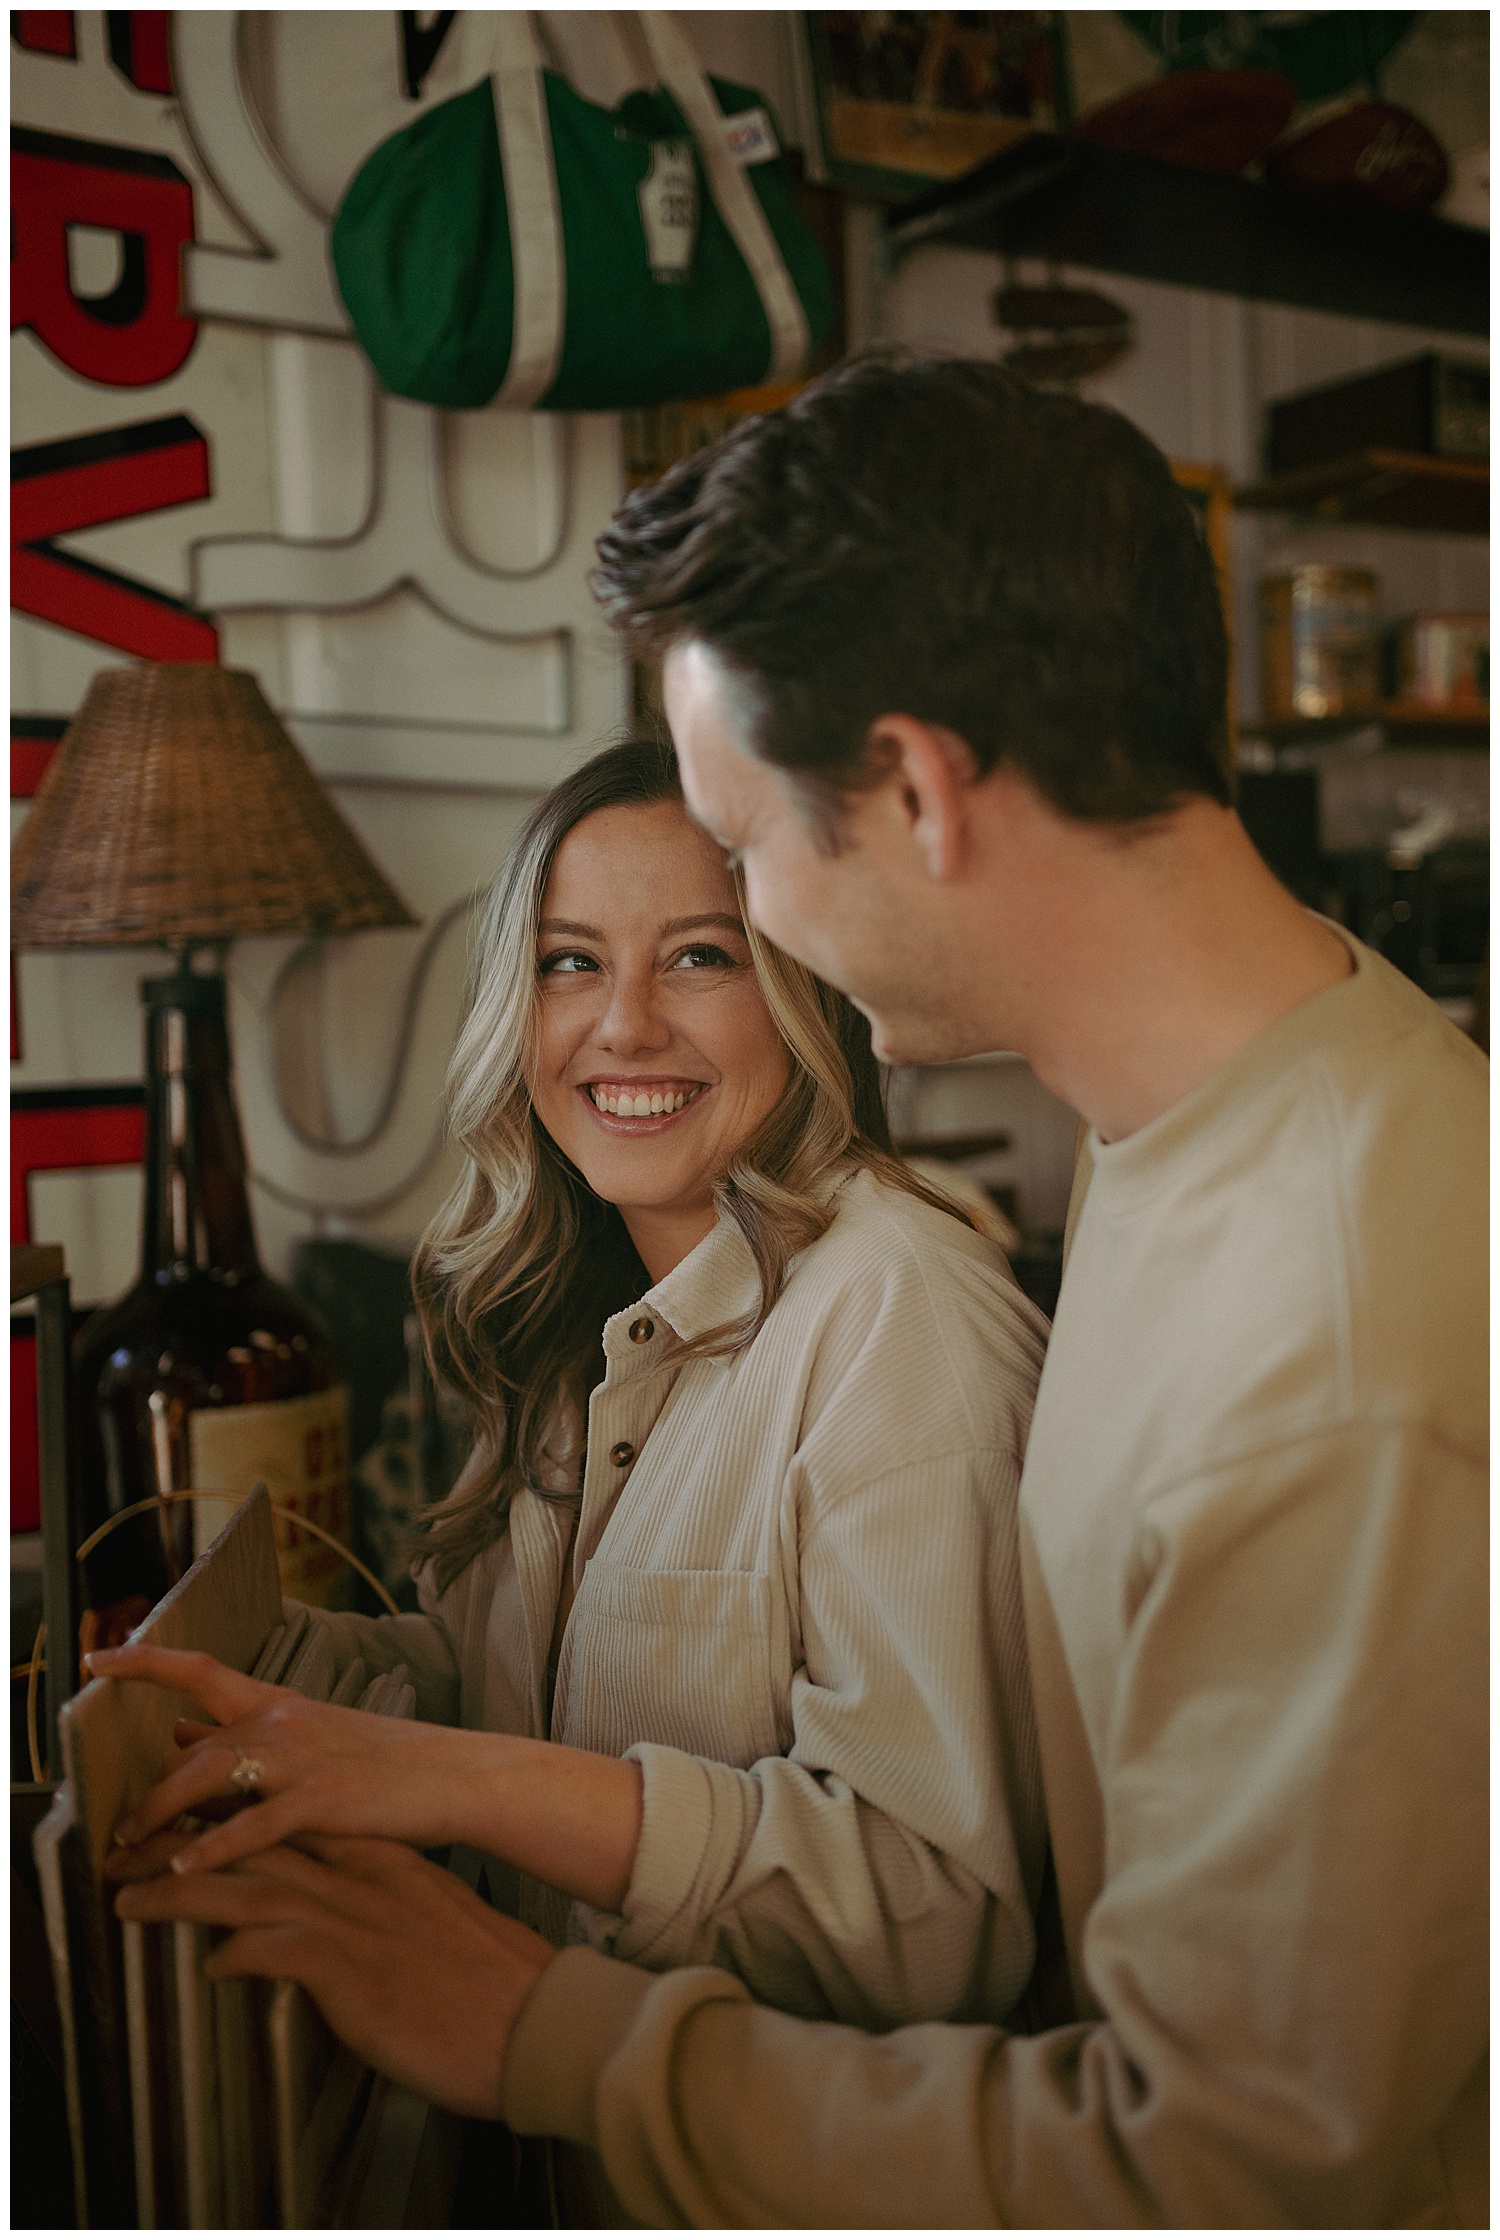 Looking through records during their antique store engagement session